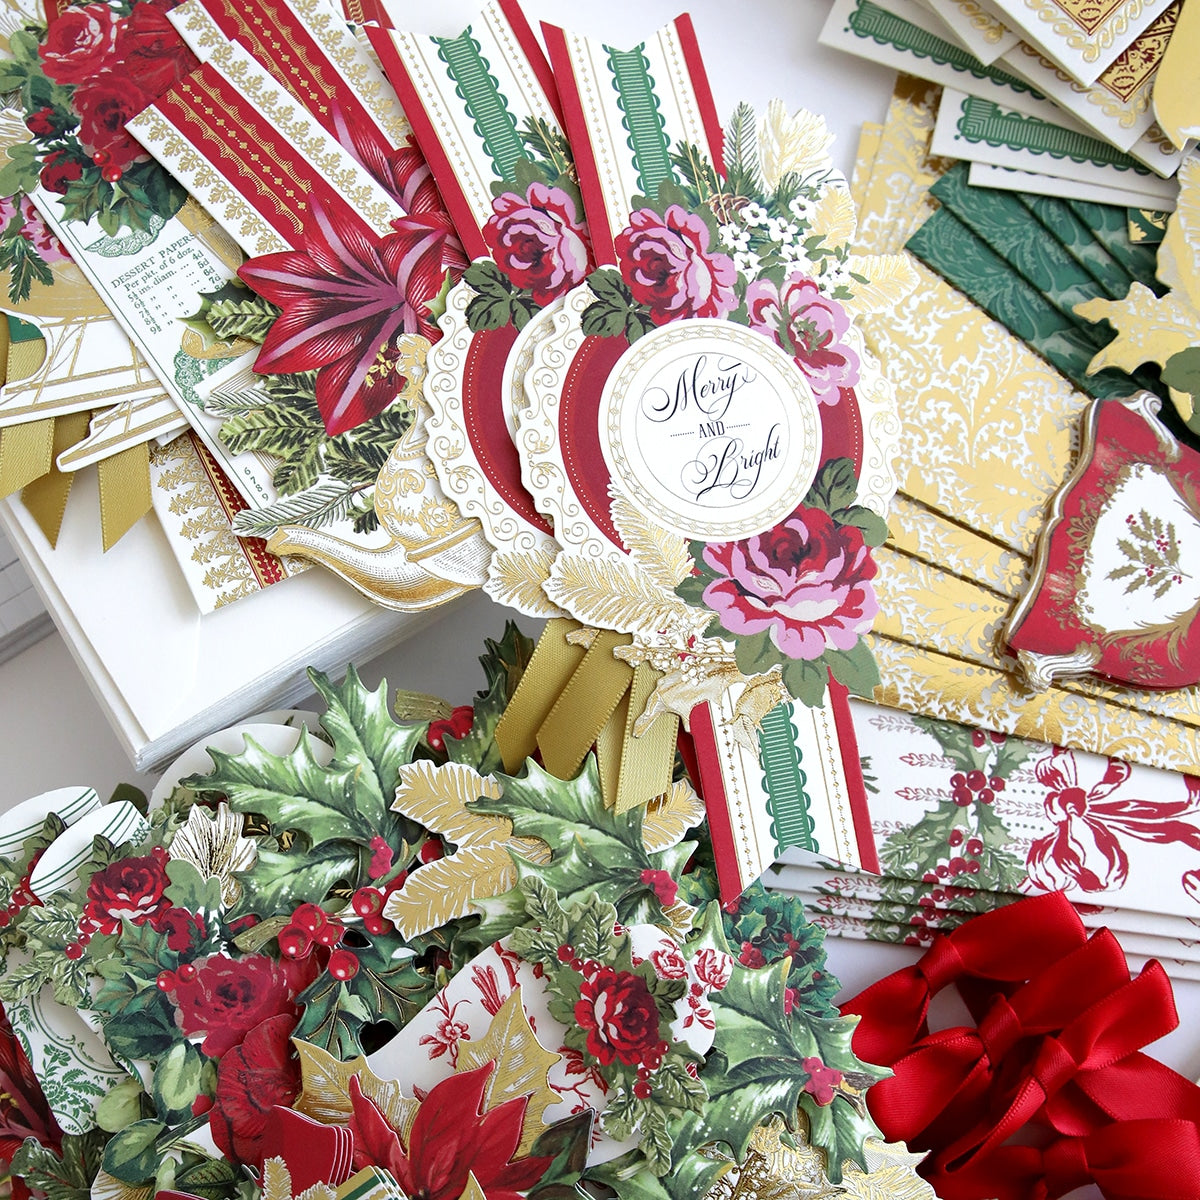 A Christmas Wishes Card Making Kit with ribbons and bows.